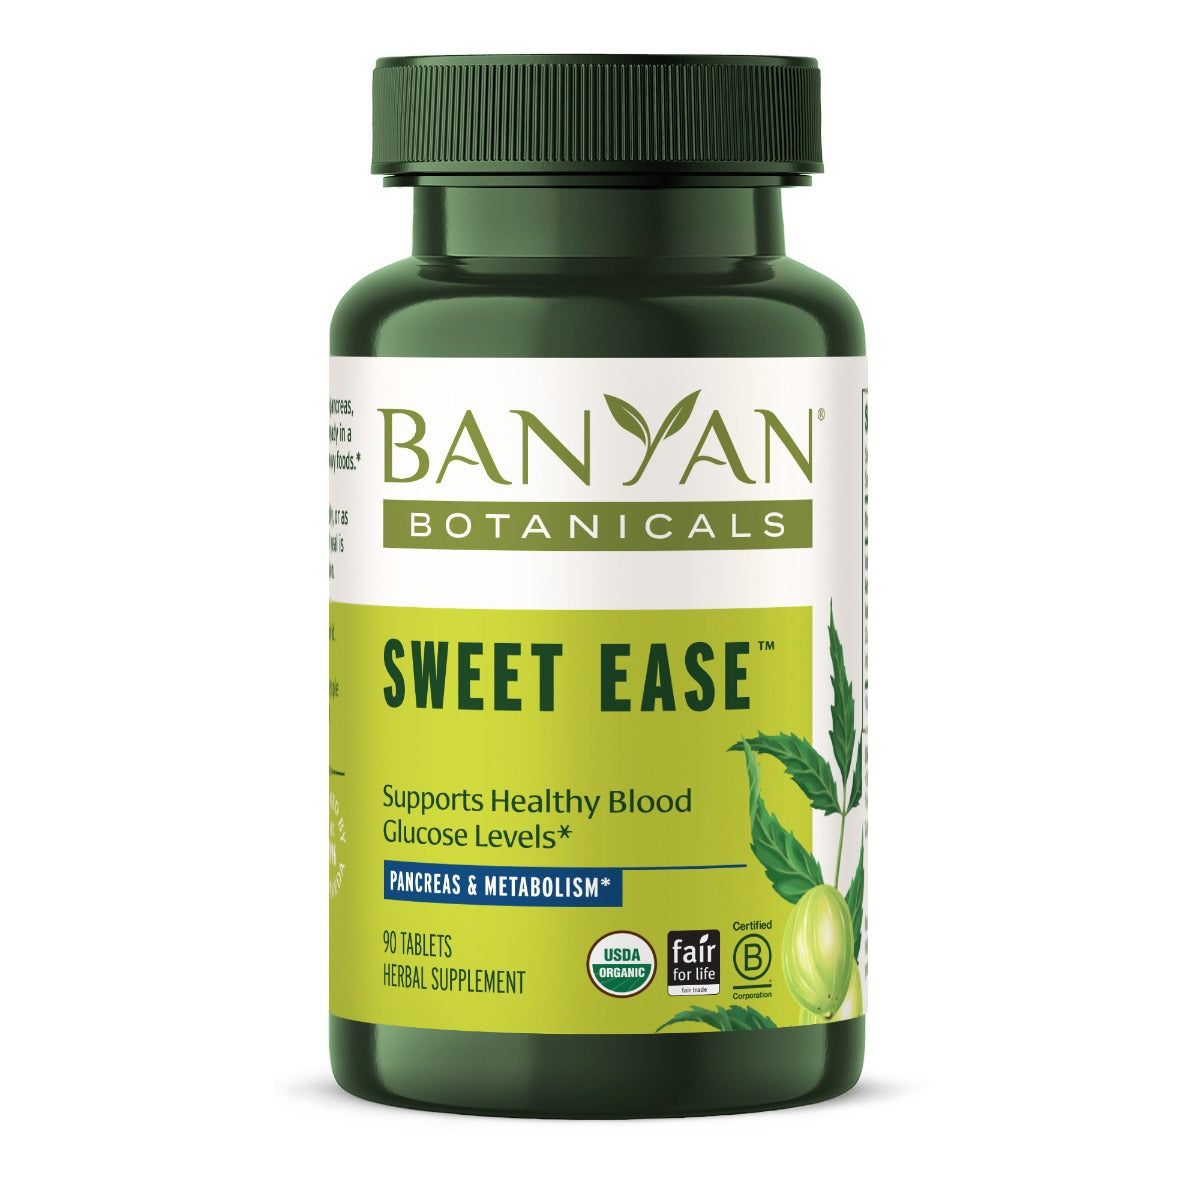 Sweet Ease™ tablets